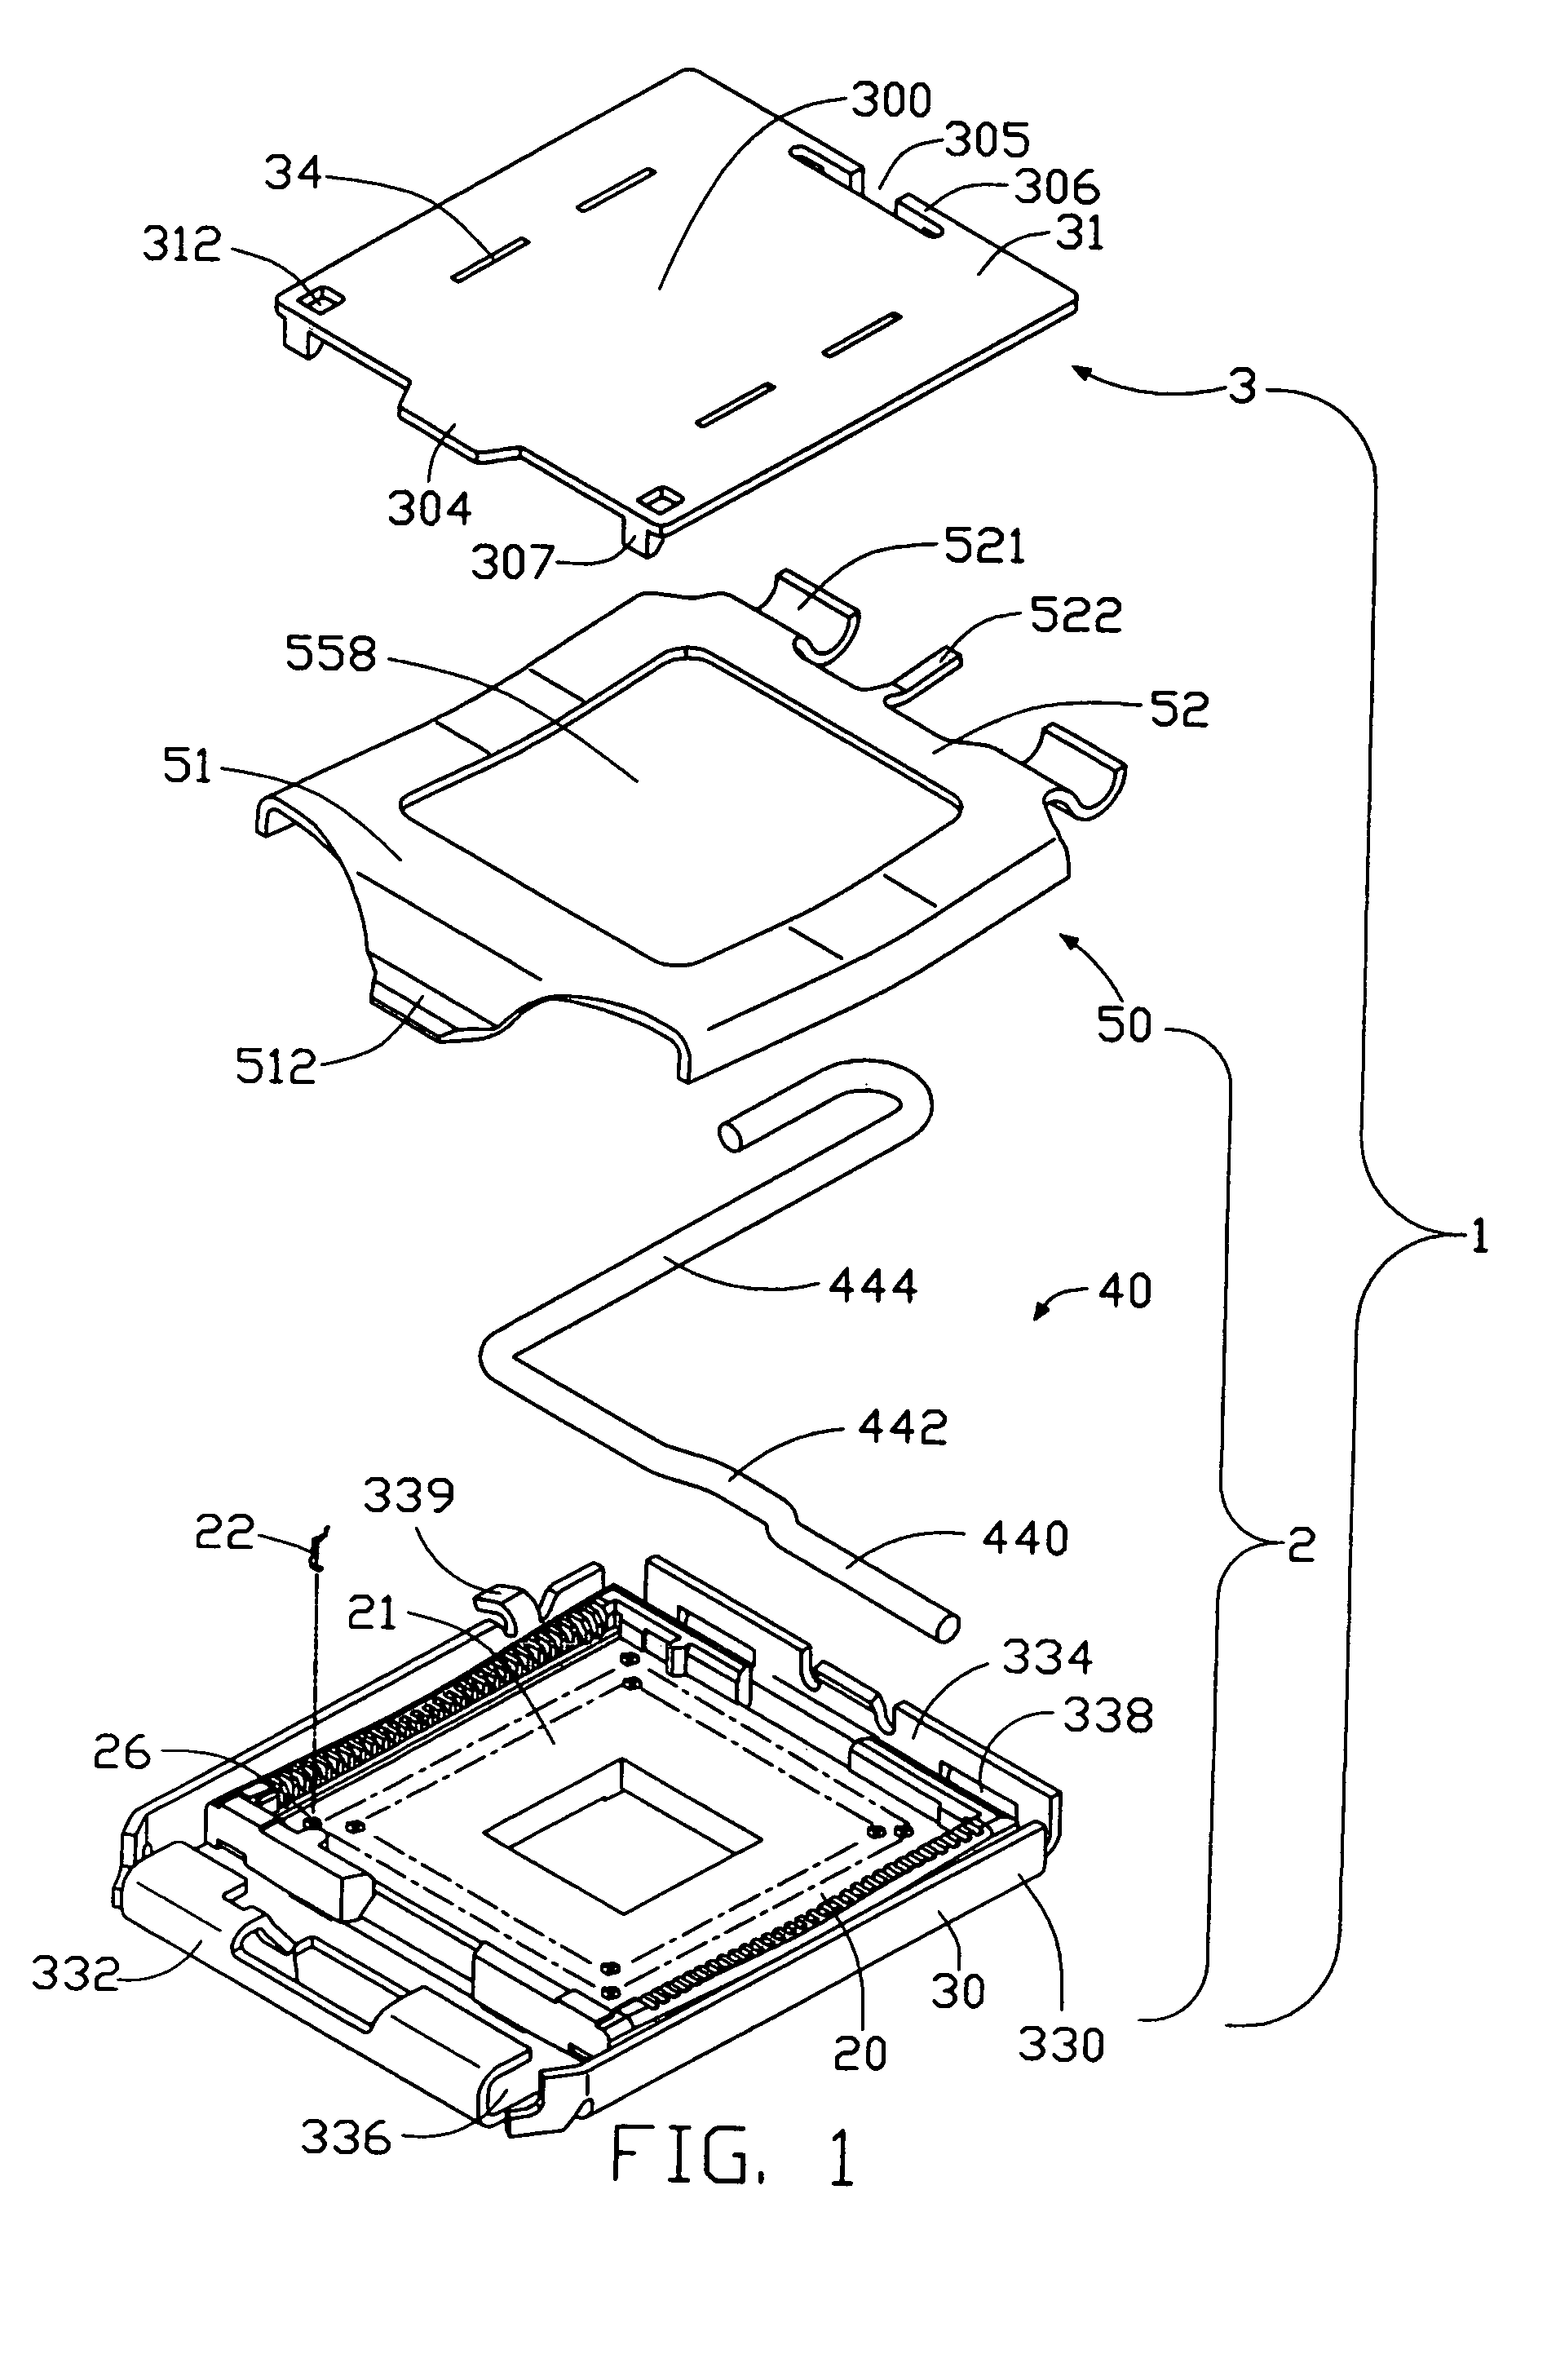 Electrical connector assembly with pick up cap